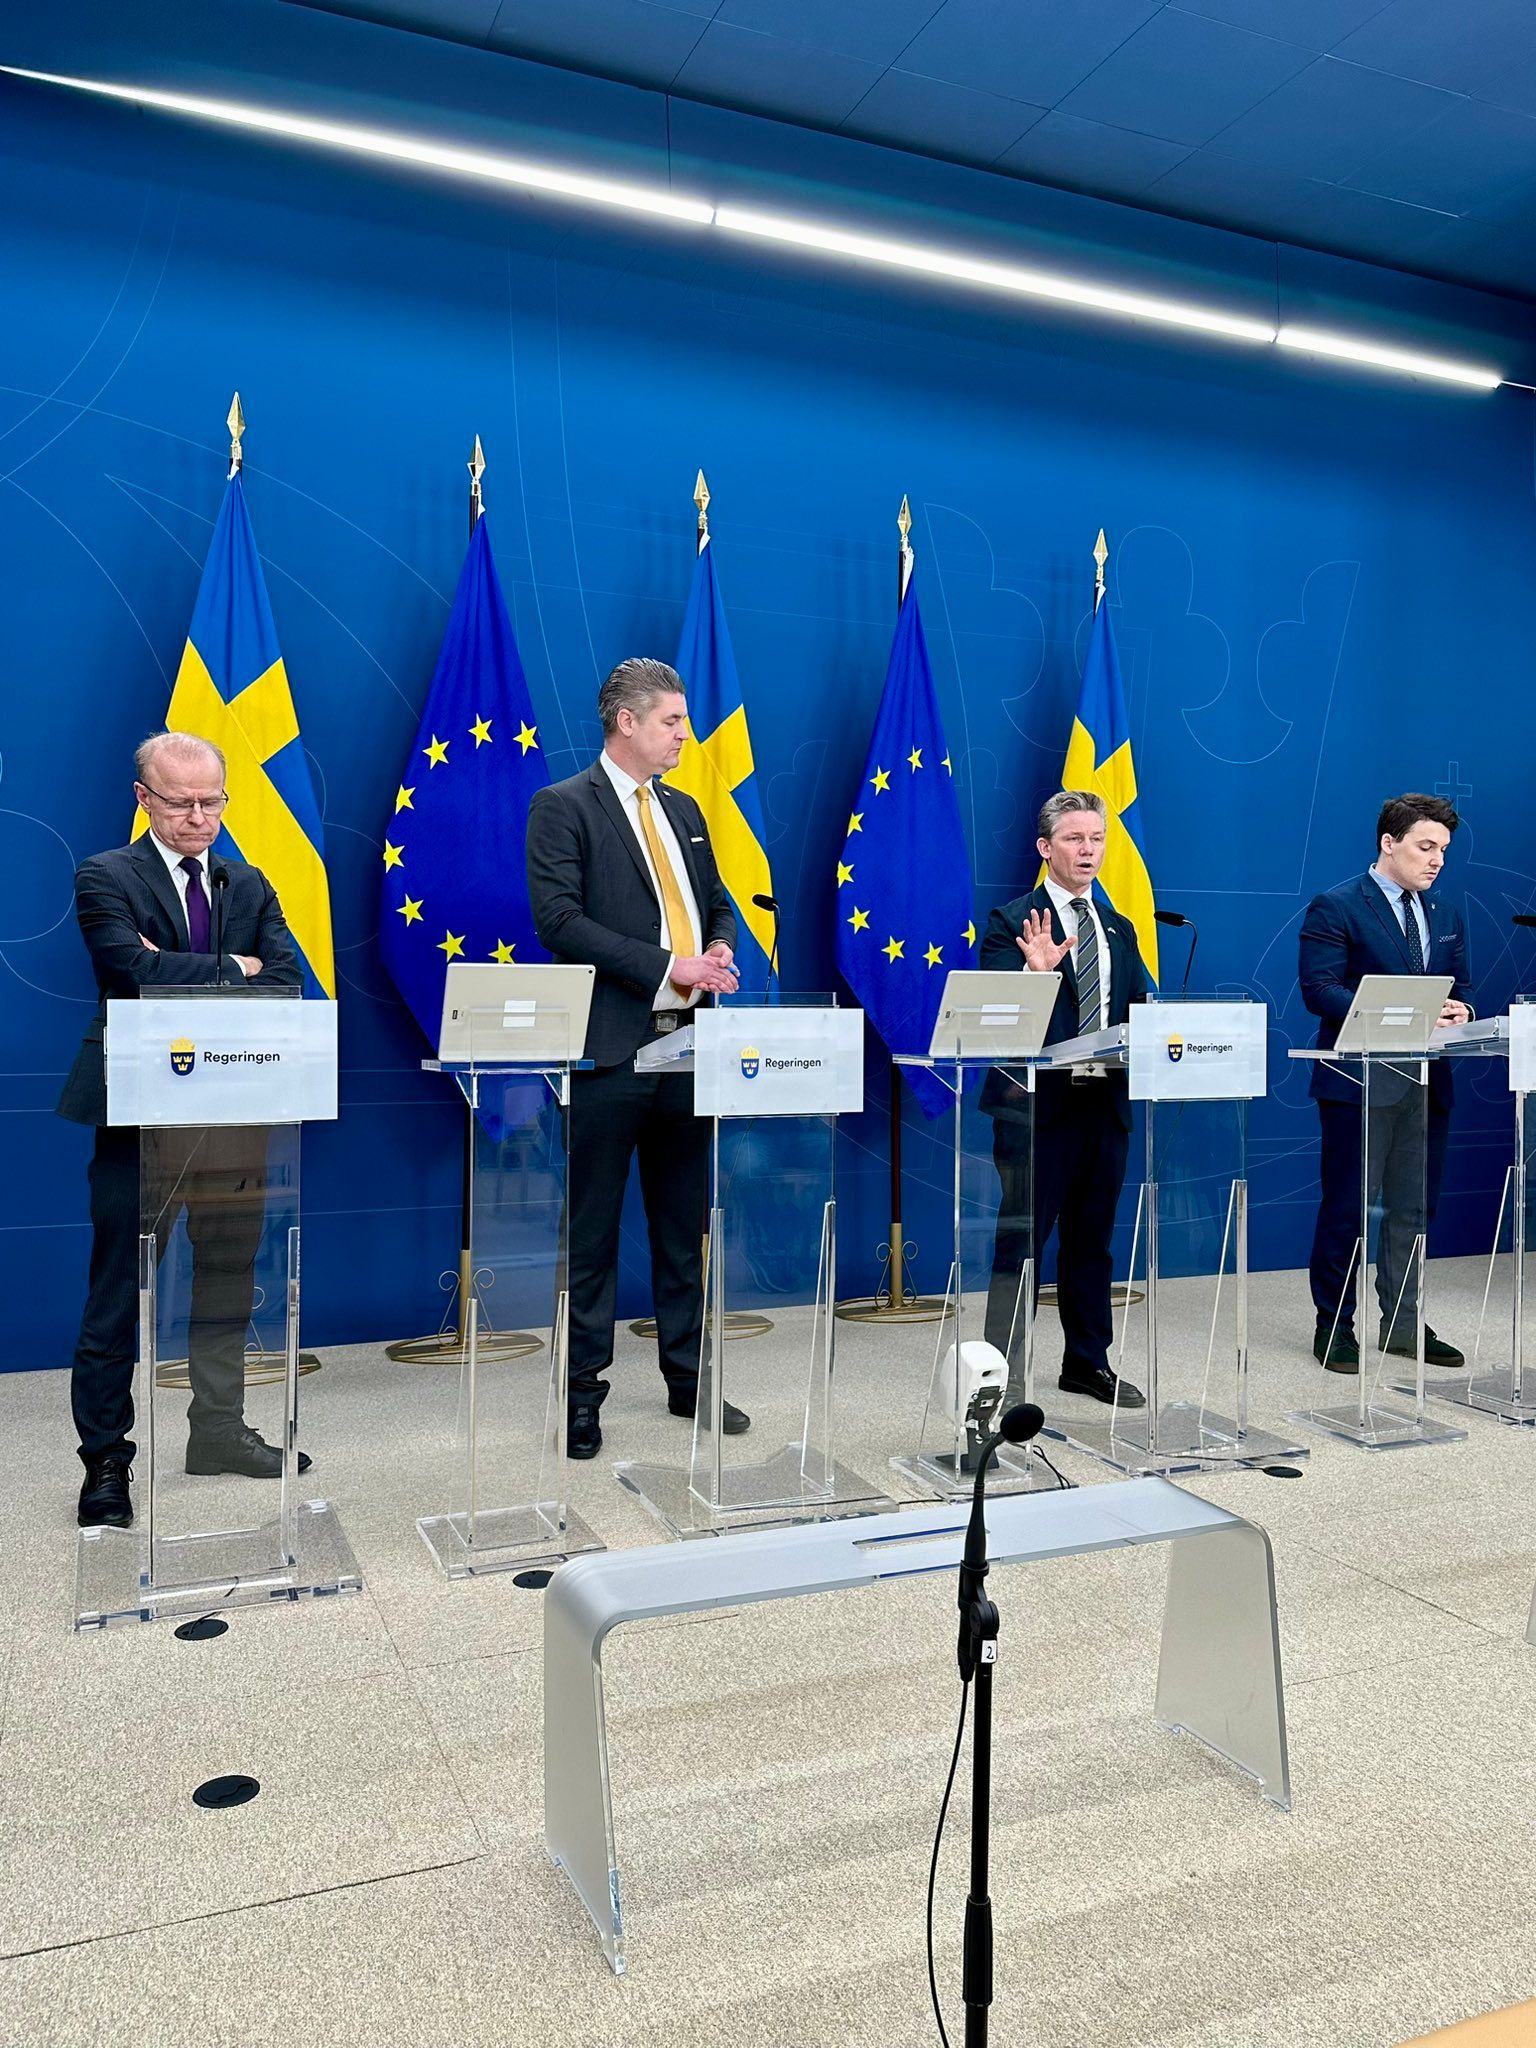 Sweden Announces Largest Support Package for Ukraine Yet